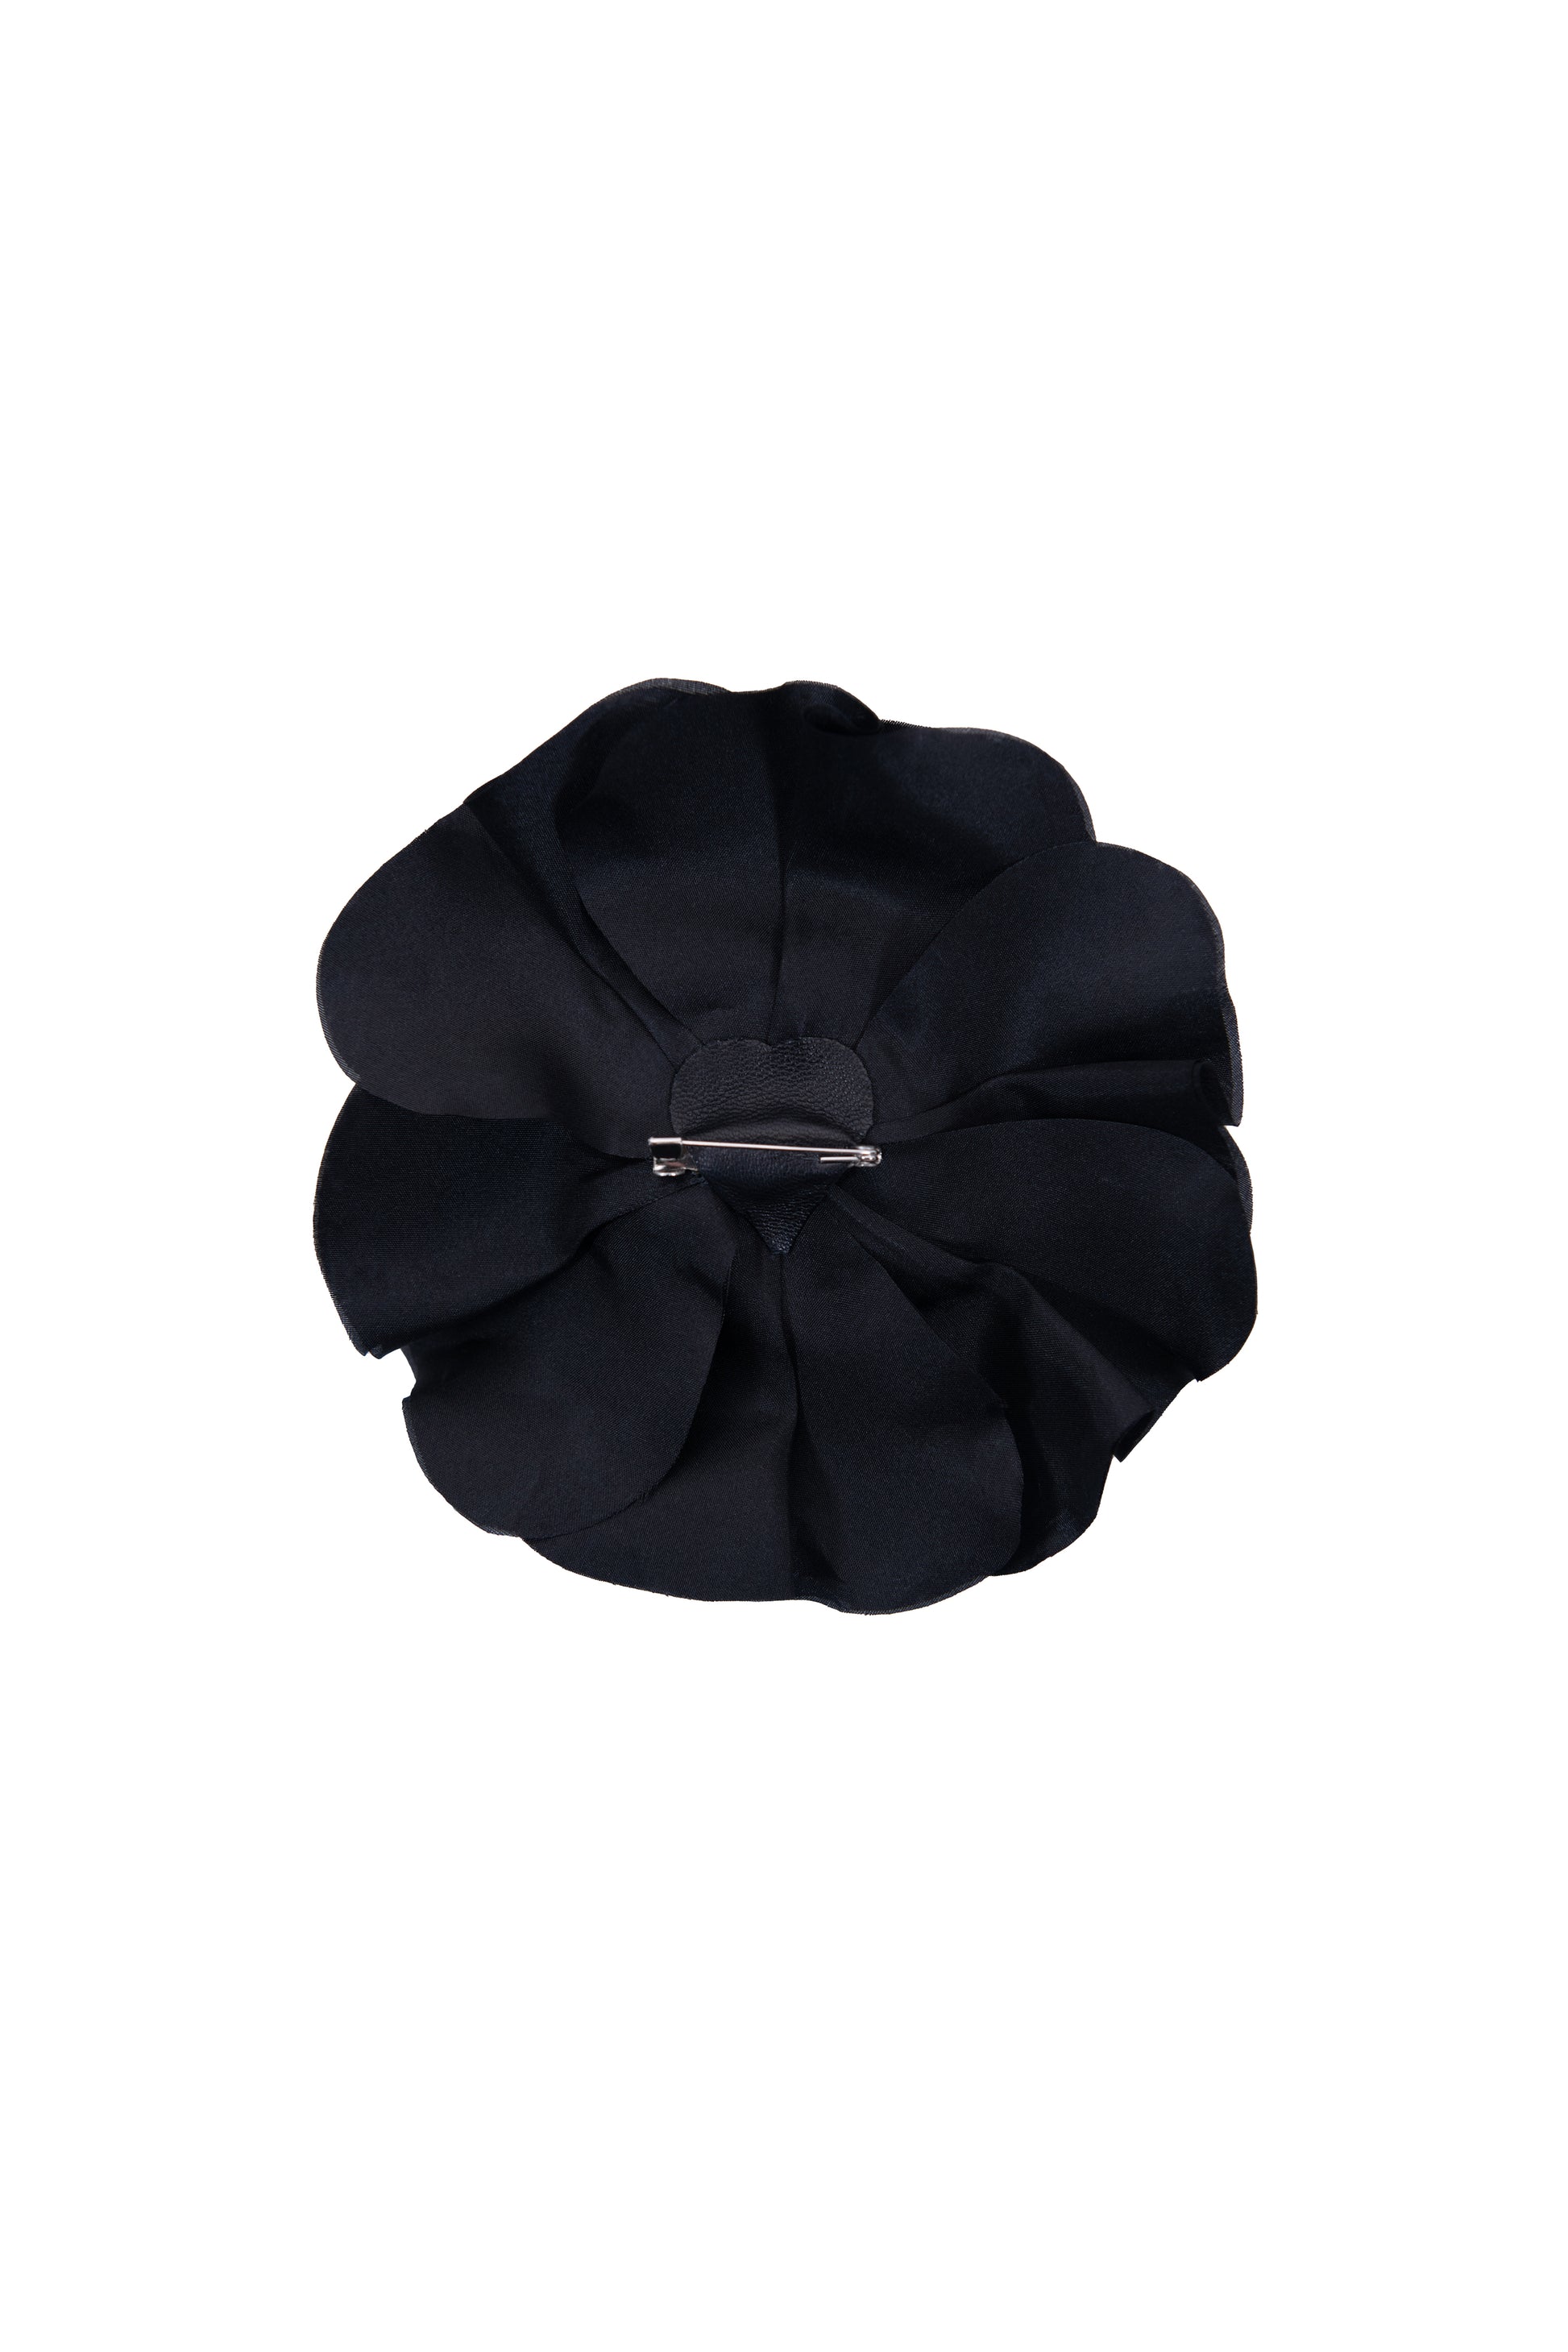 The Irish Twin - Anemone flower Brooch - black Silk fabric - Made in France - Made in Paris - Handmade in Paris - Designed in Paris - Handcrafted - Be my Guest - Made to love and to last - Unique piece made by hand - original and special for Host Wear by The Irish Twin - created by Jill Bauwens